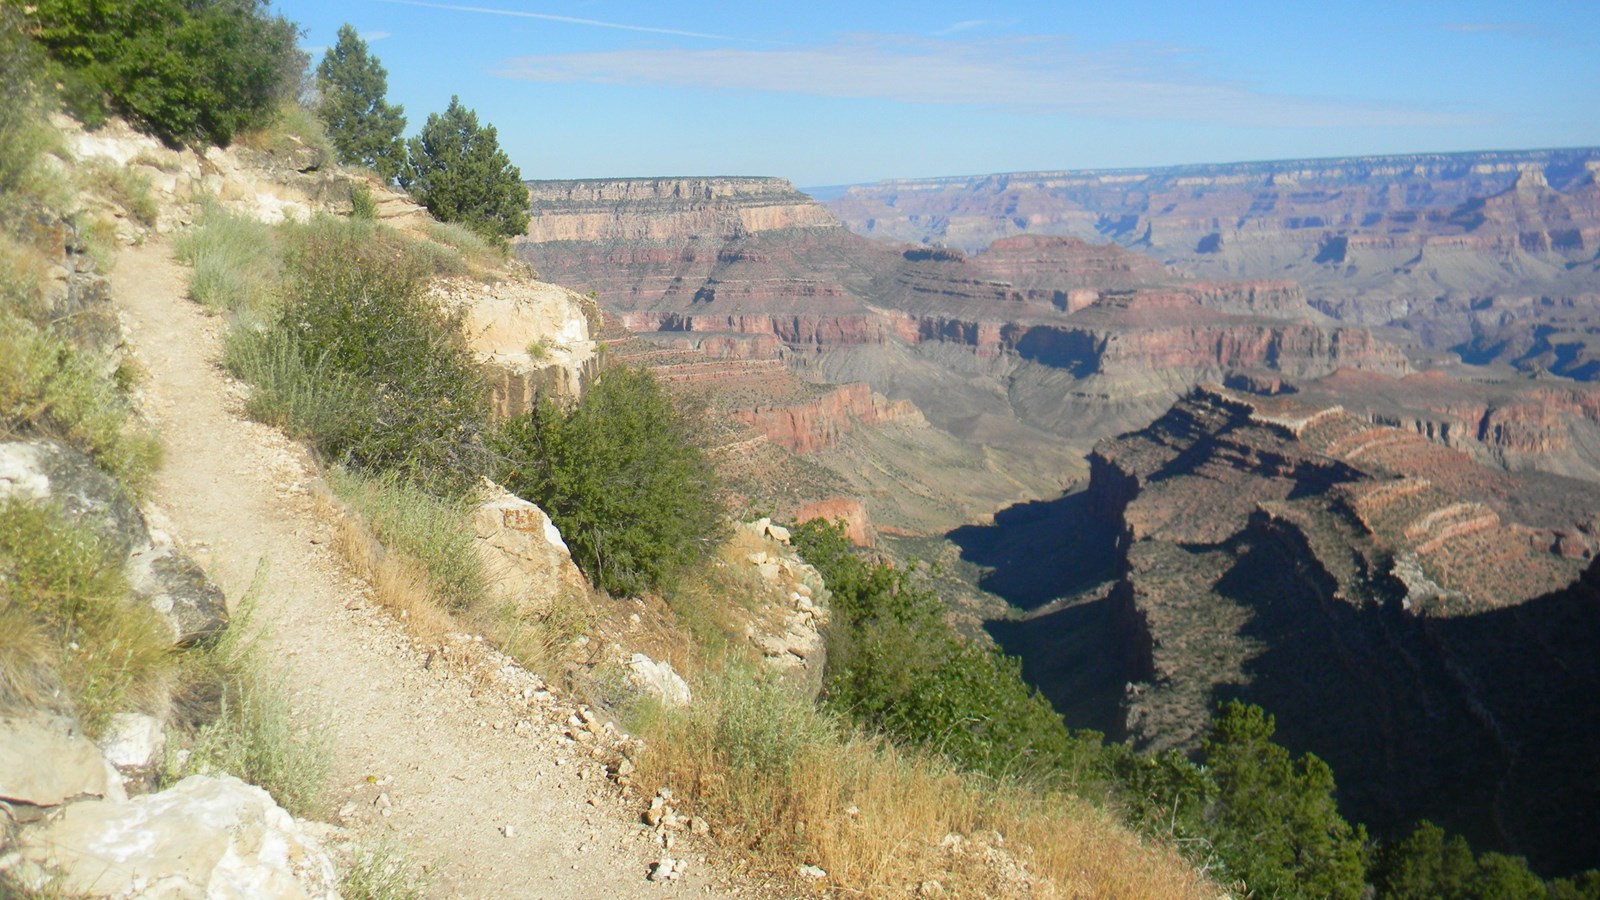 A rocky trail leads down into the depths of Grand Canyon along the side of a steep slope.